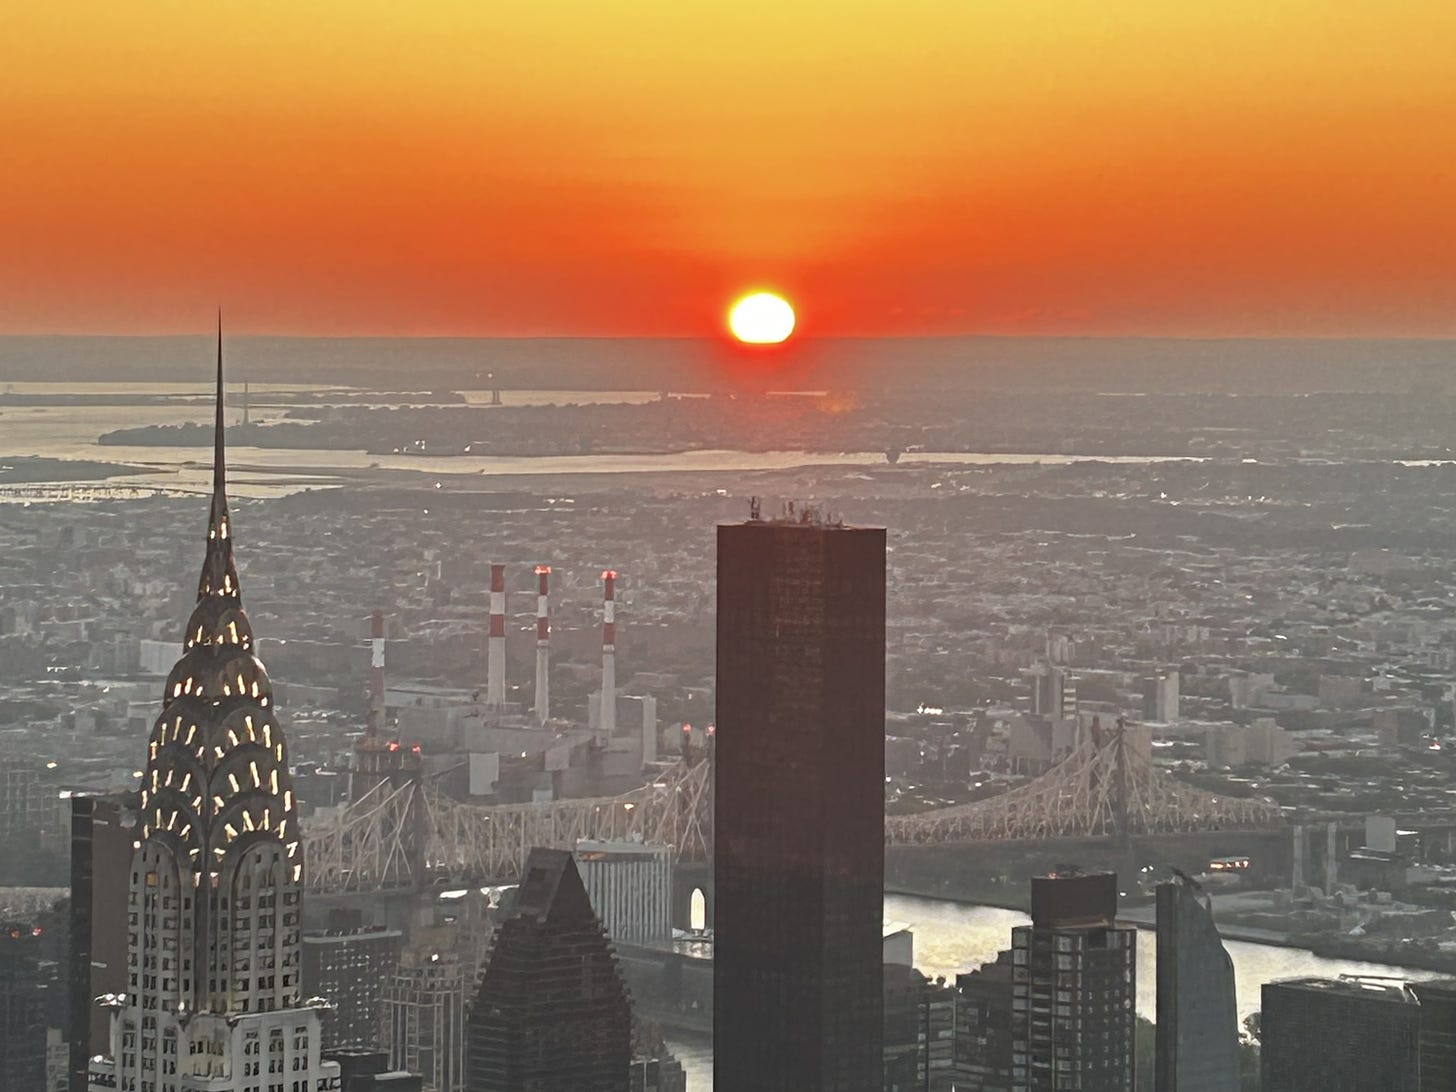 View of new york skyline, from Empire state building, looking towards chrysler building and bridge with big orange sun rising in background